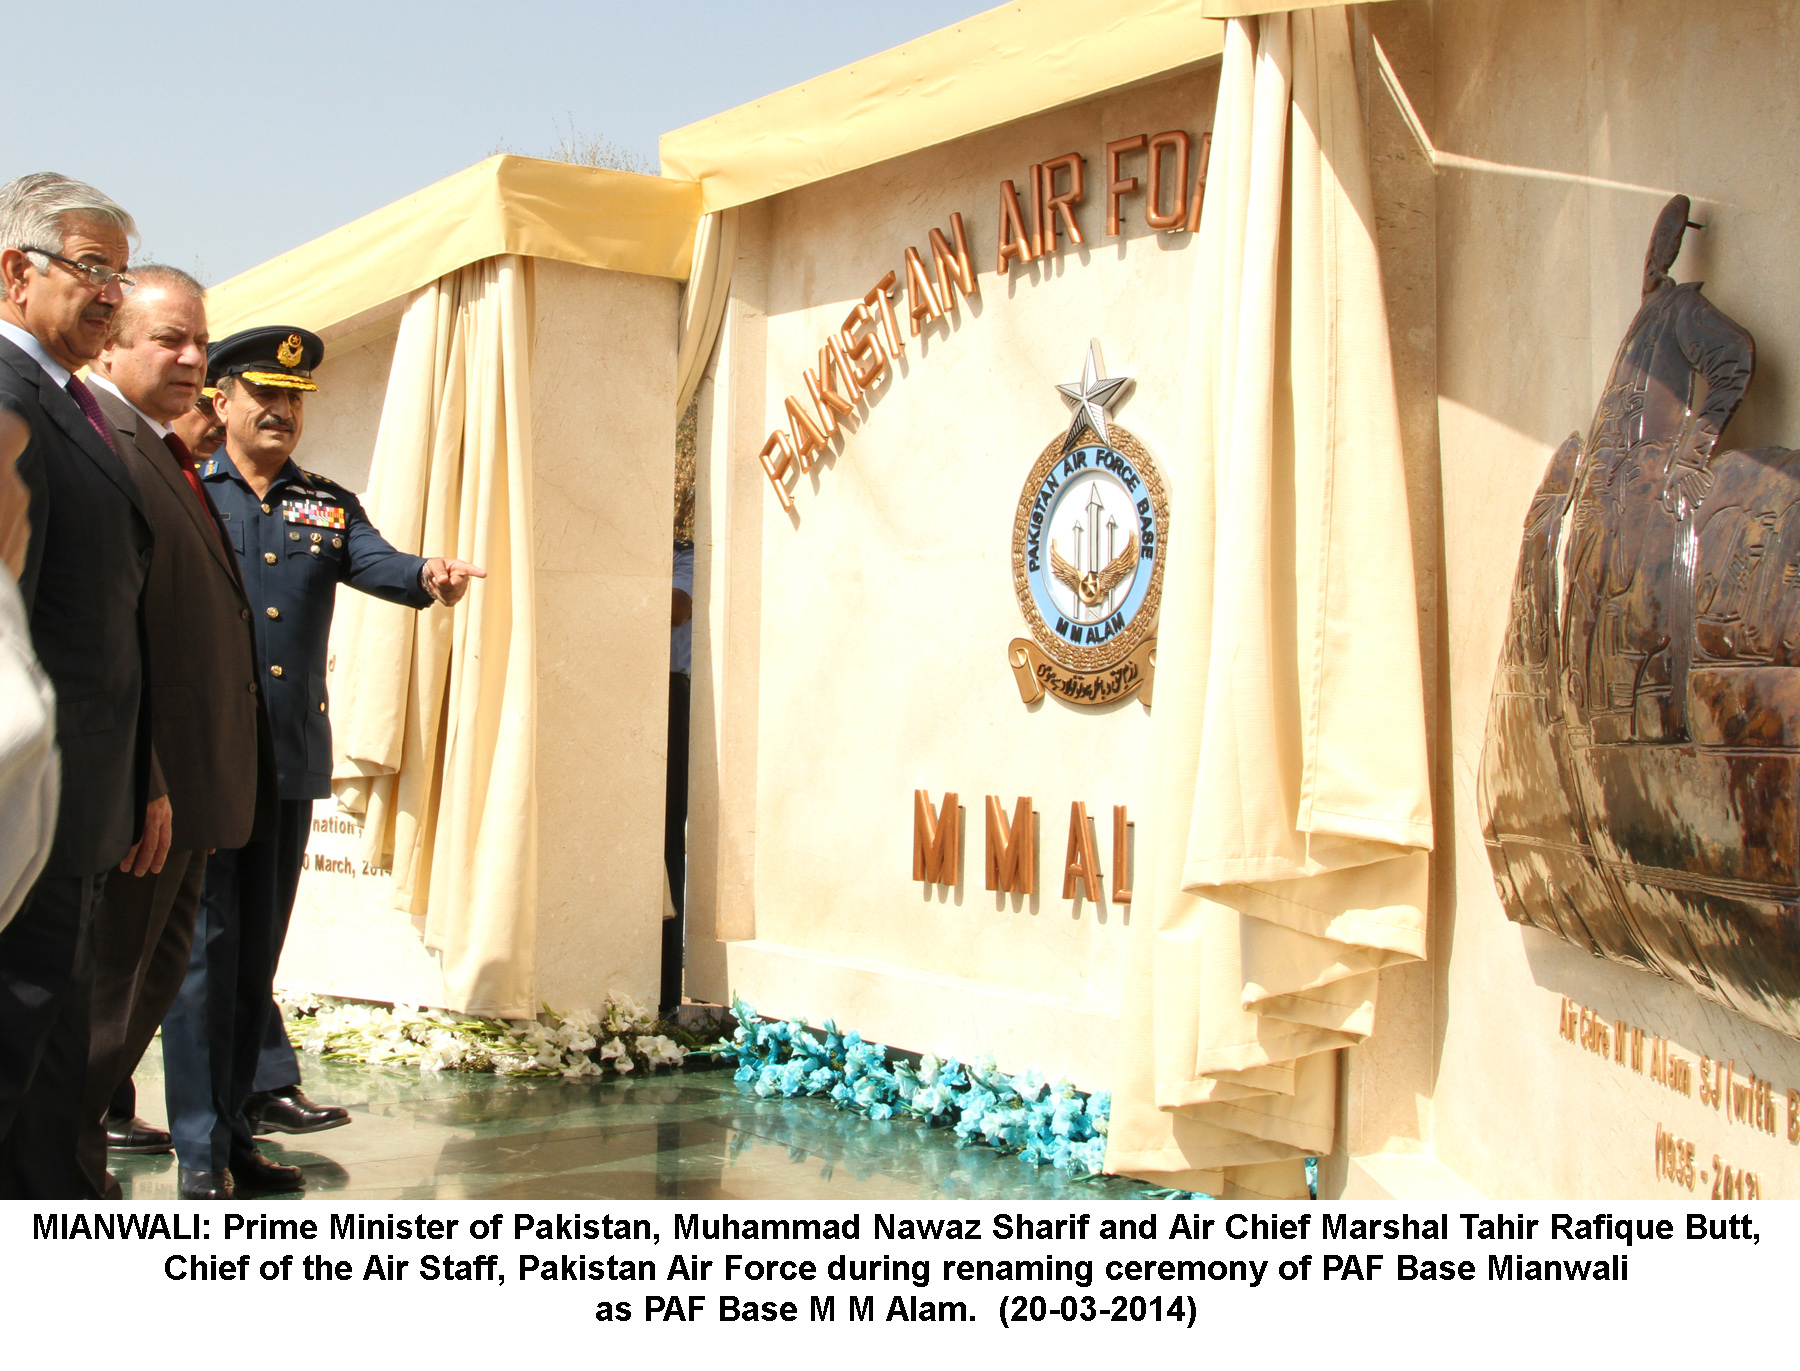 prime minister nawaz sharif and air chief marshal tahir rafique butt chief of air staff paf during the renaming ceremony of paf base mianwali to paf base mm alam photo paf